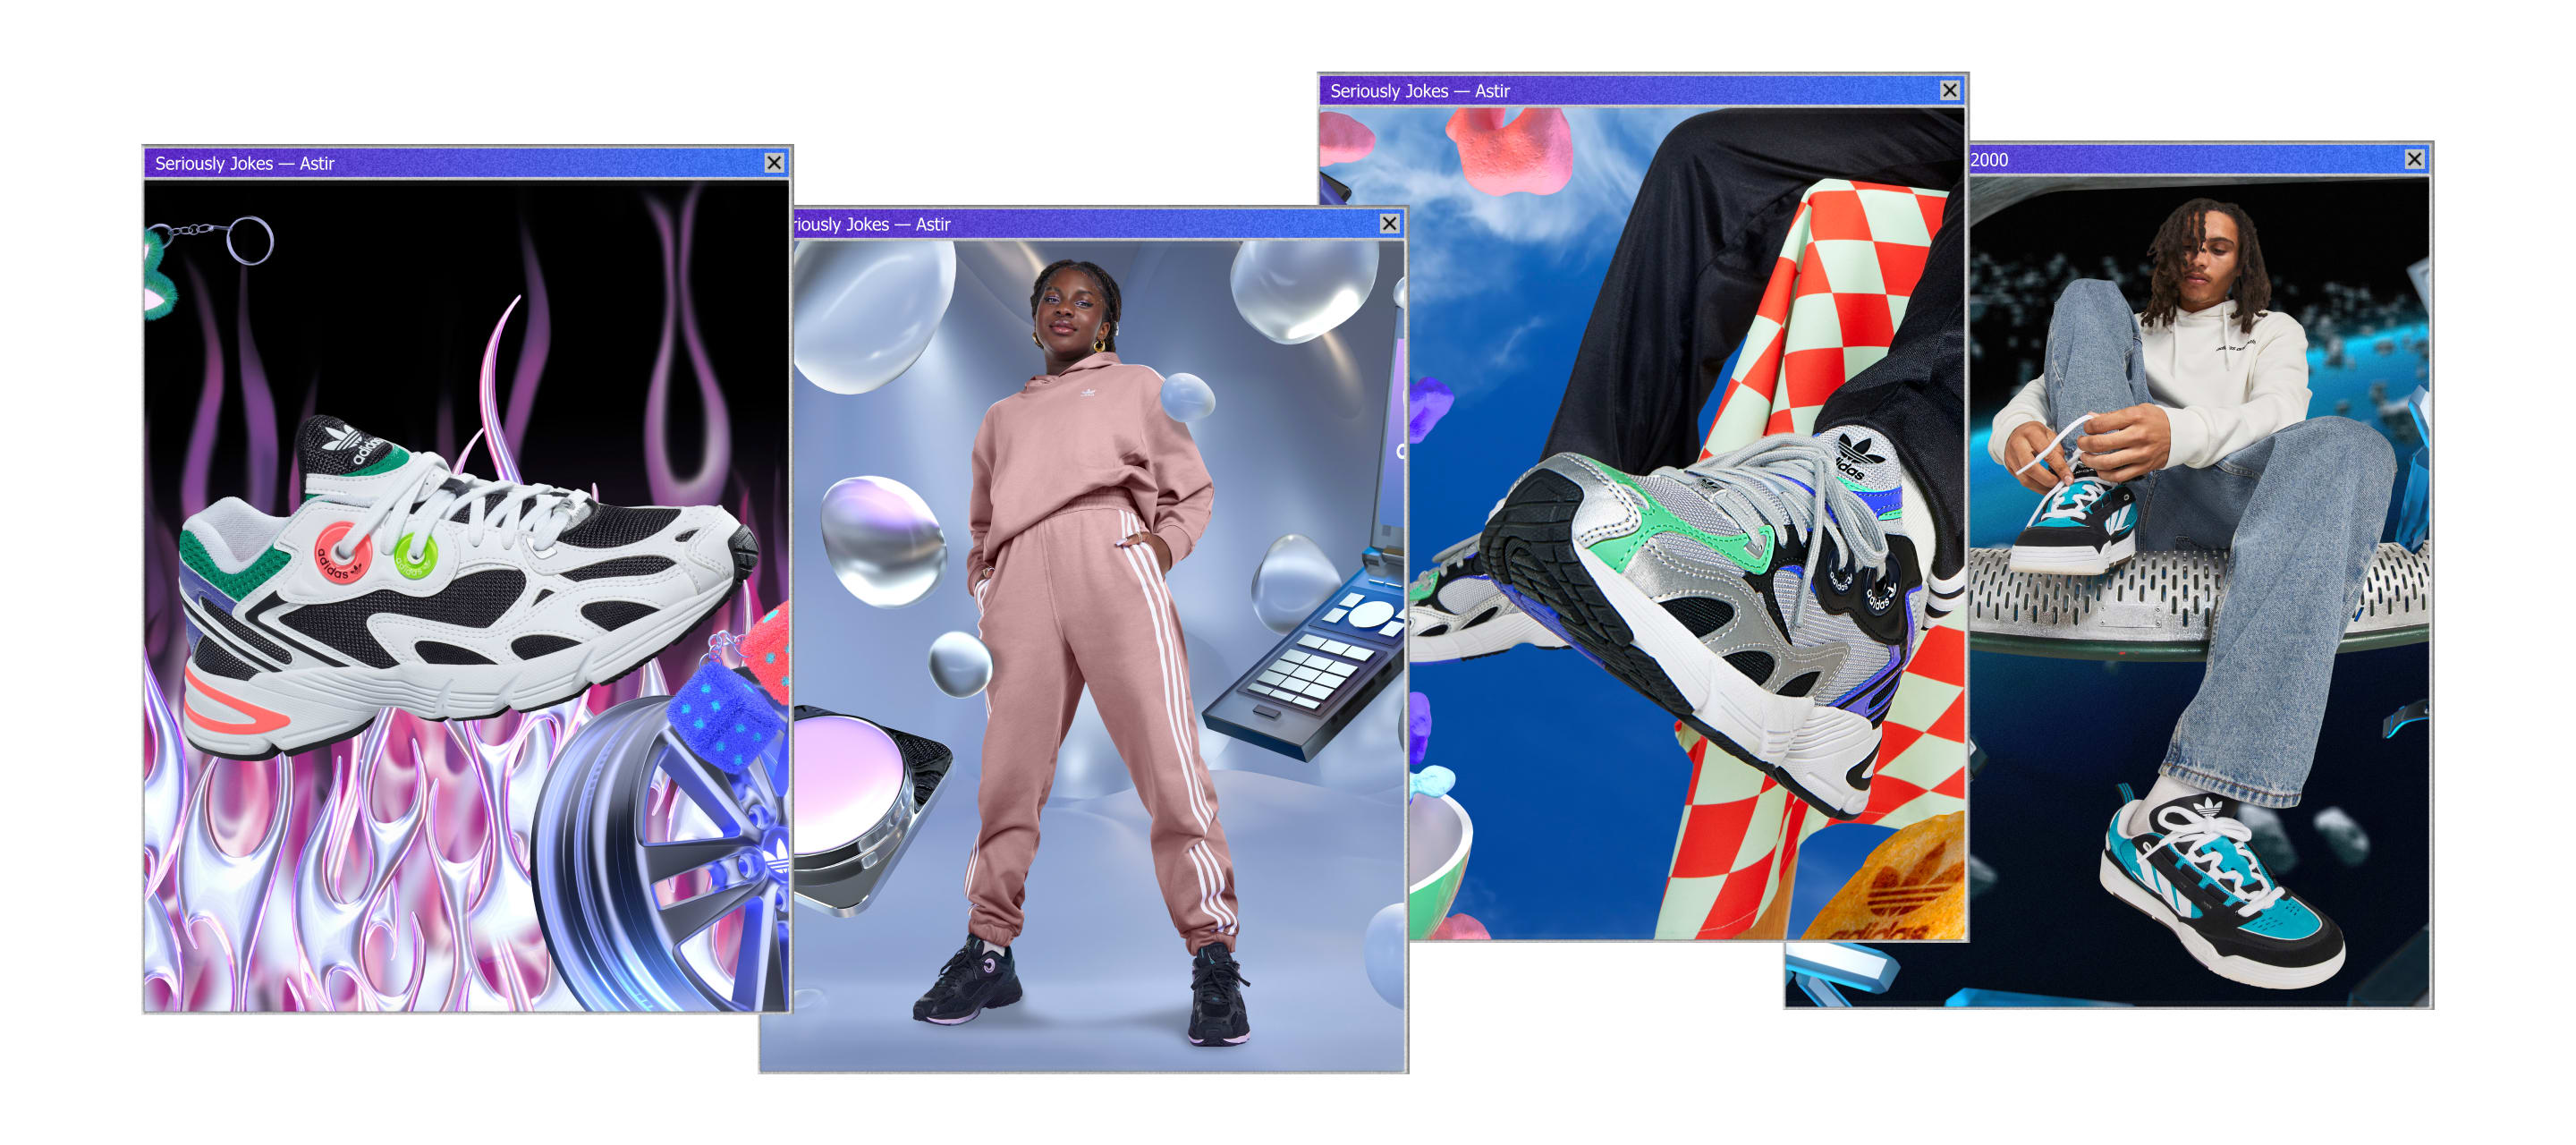 Four perpendicular images of models wearing the ADI2000 and Astir sneakers in various 3D environments.